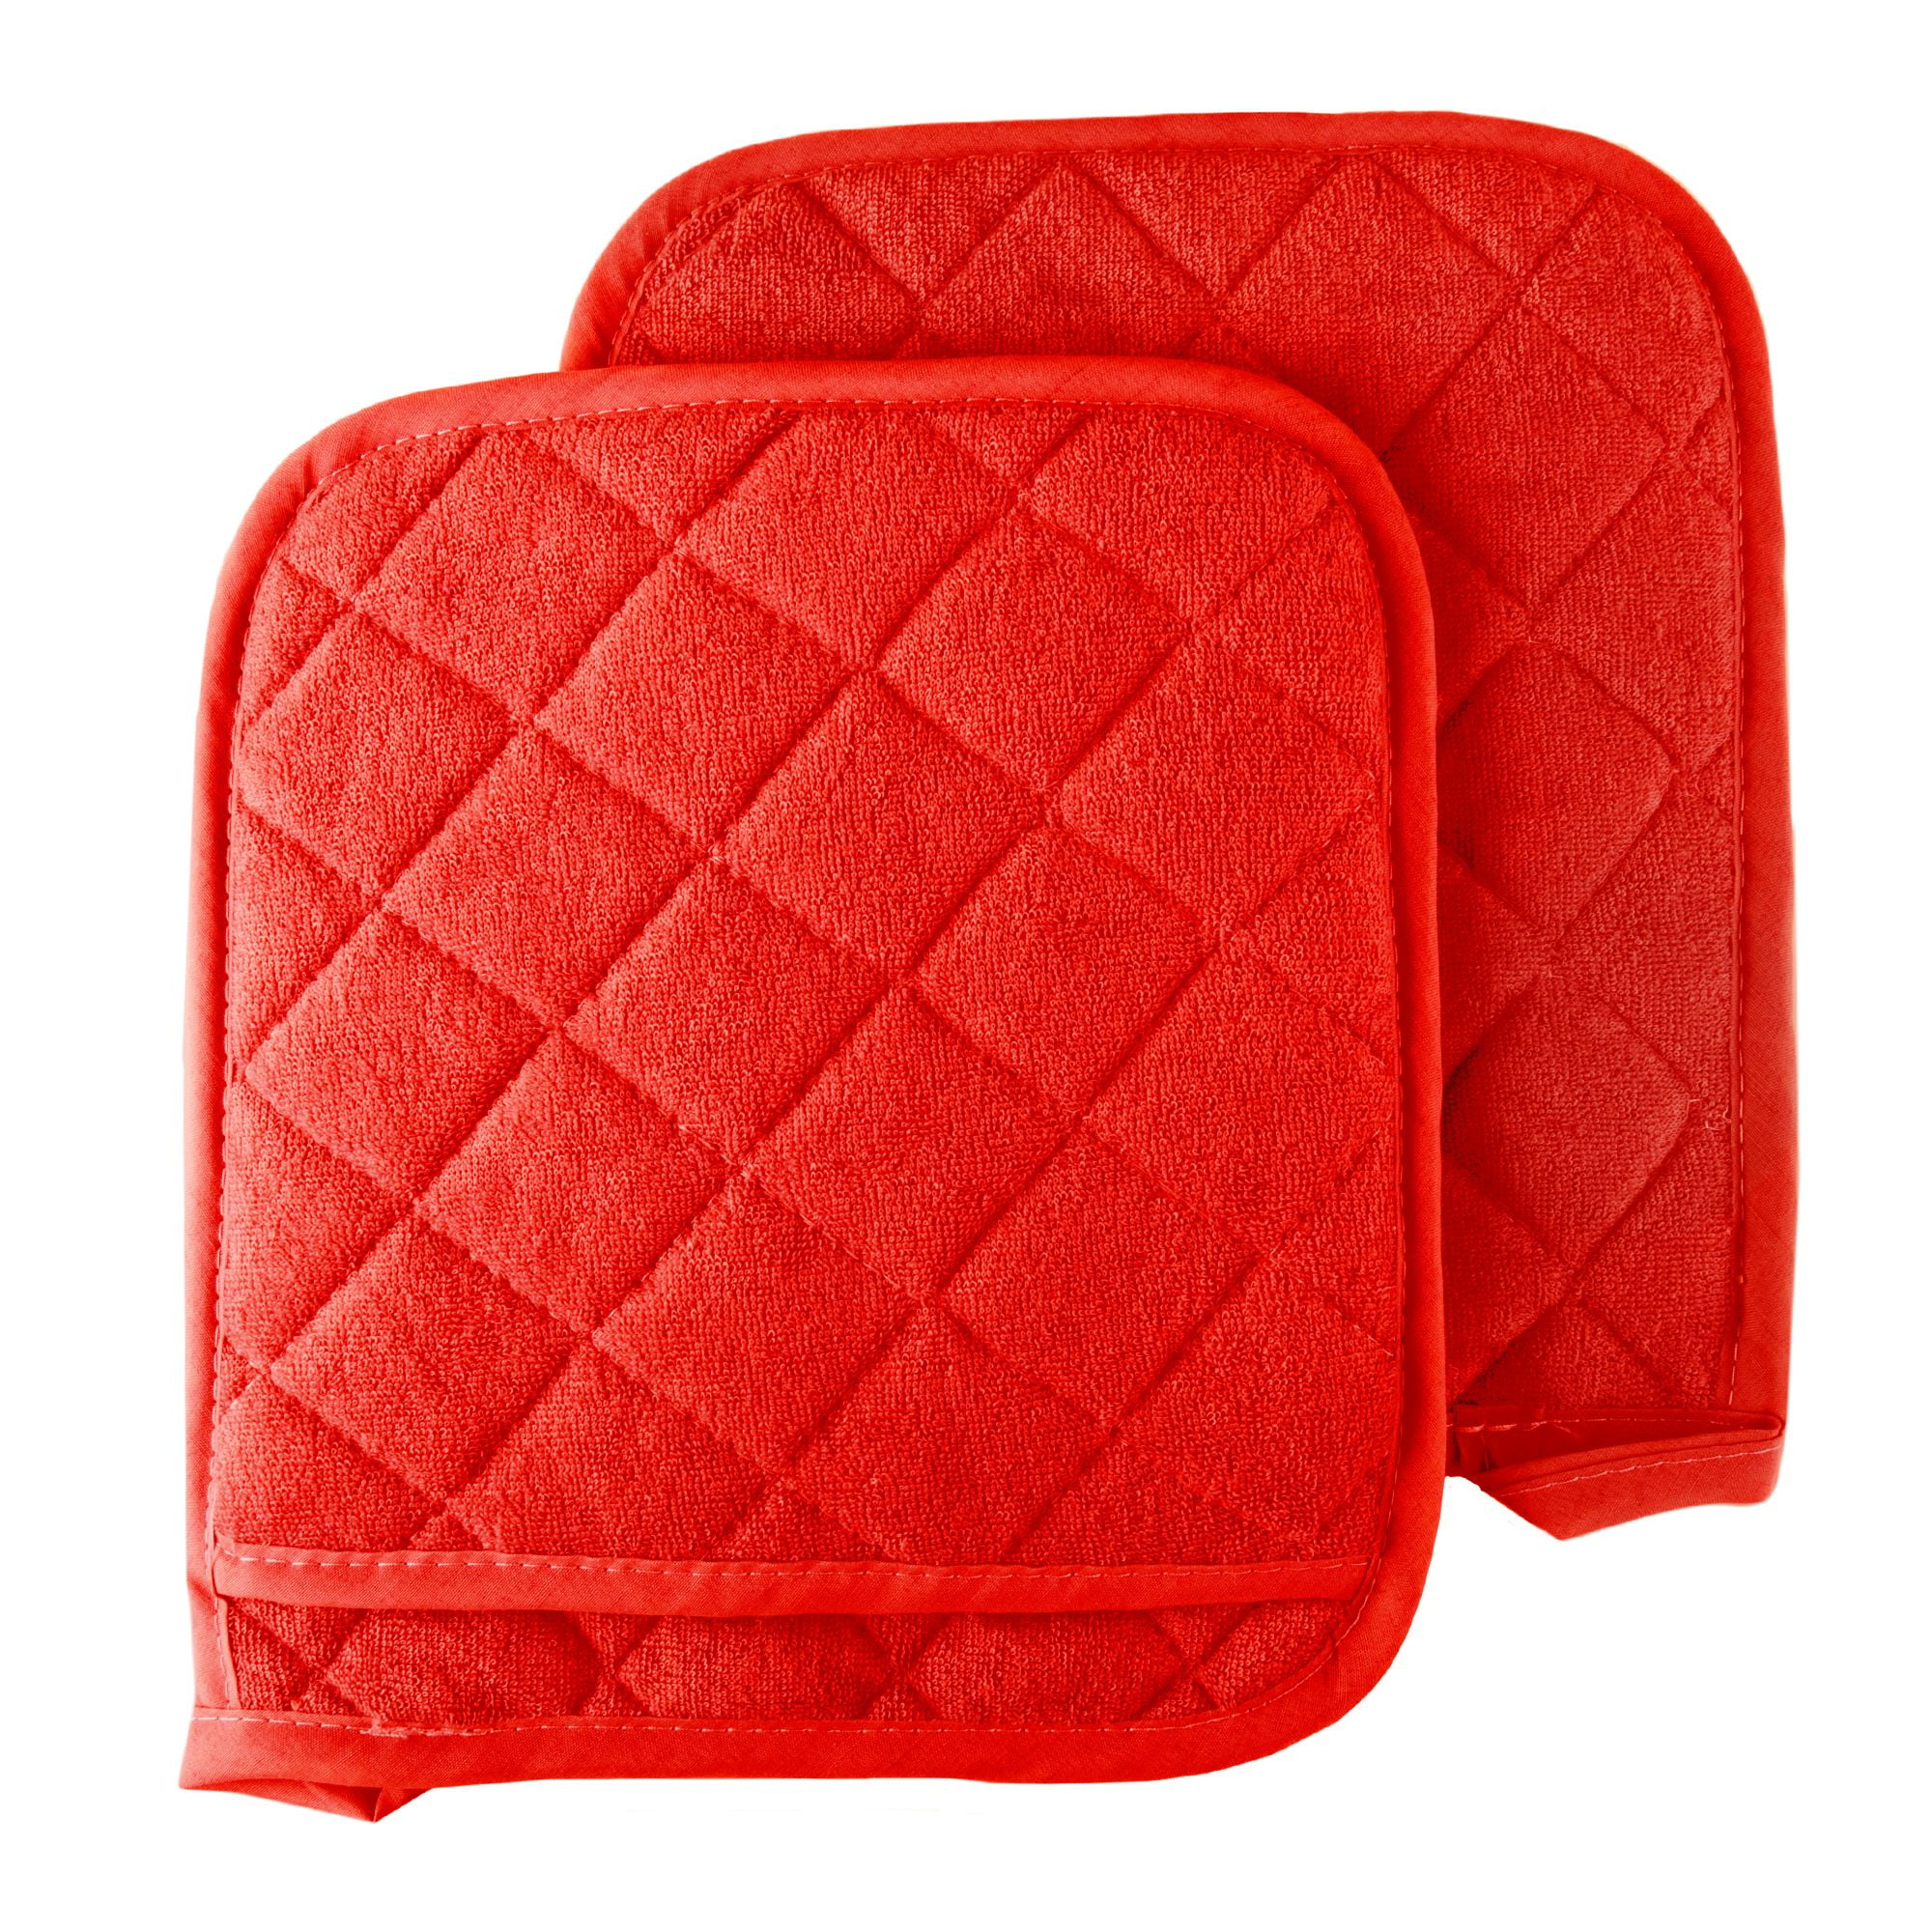 Pot Holder Set, 2 Piece Oversized Heat Resistant Quilted Cotton Pot Holders by Somerset Home, Size: Set of 2, Red